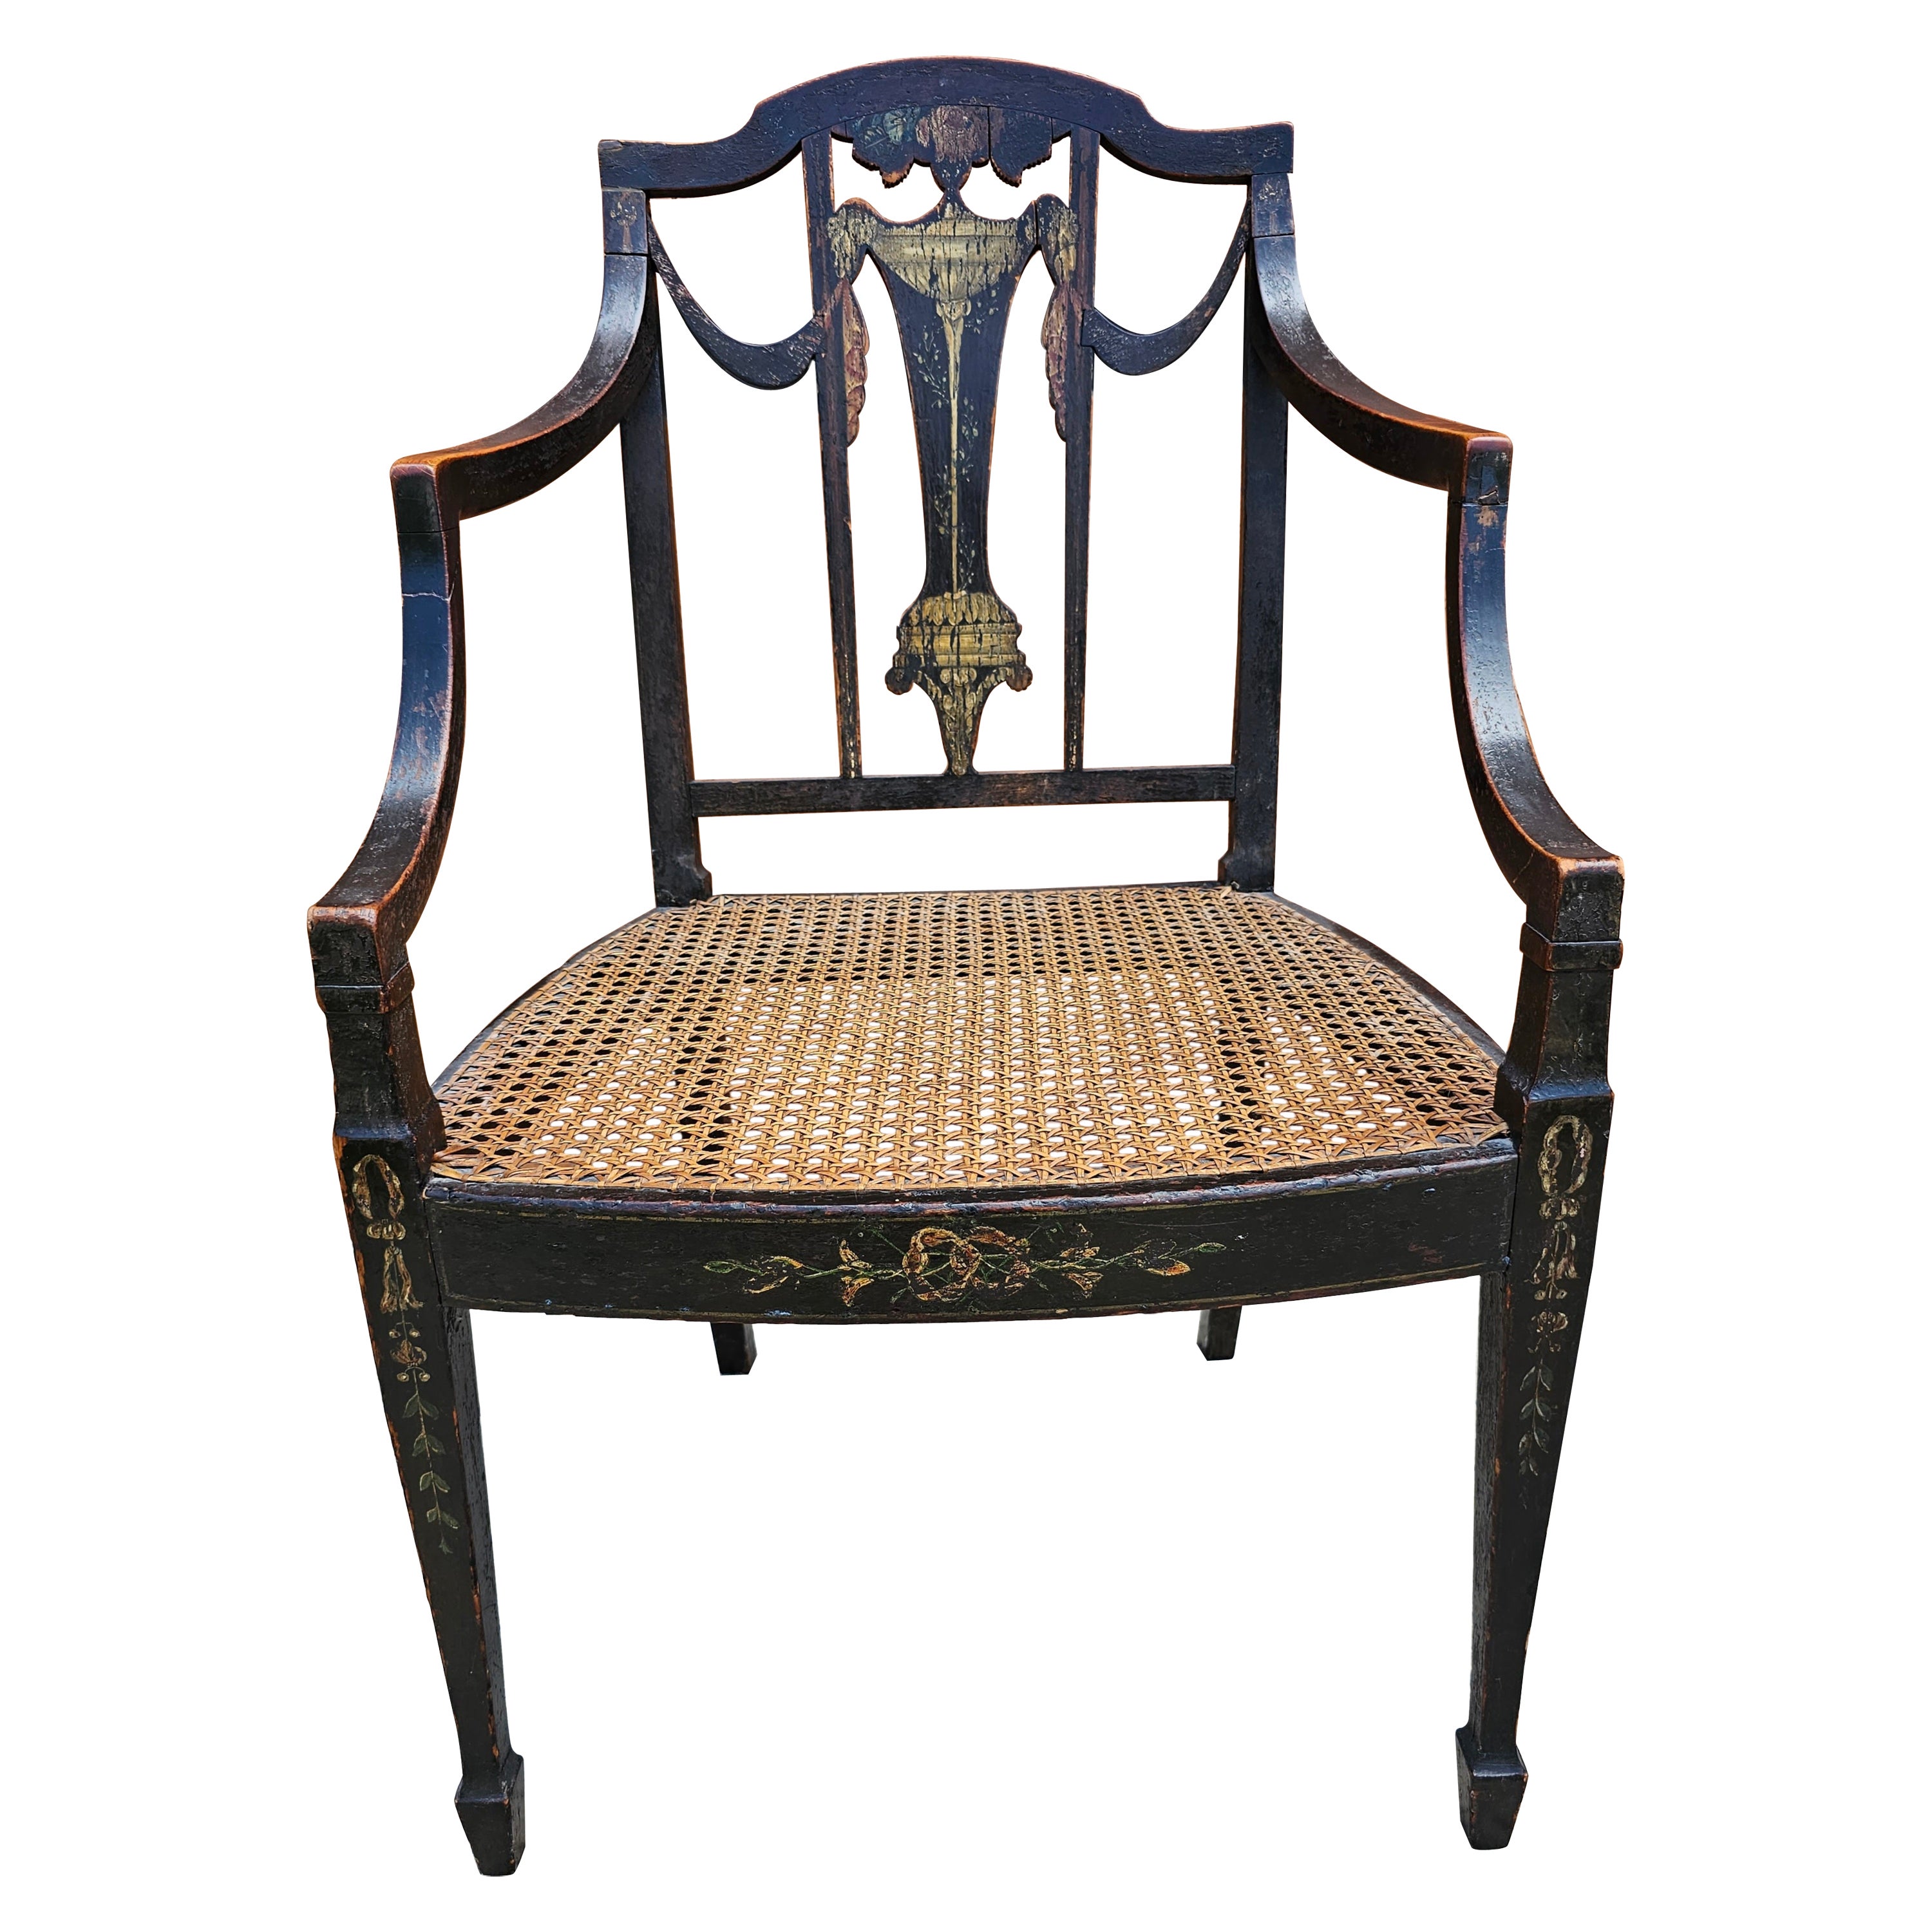 18th Century Ebonized and Inlays Decorated Cane Seat Armchair